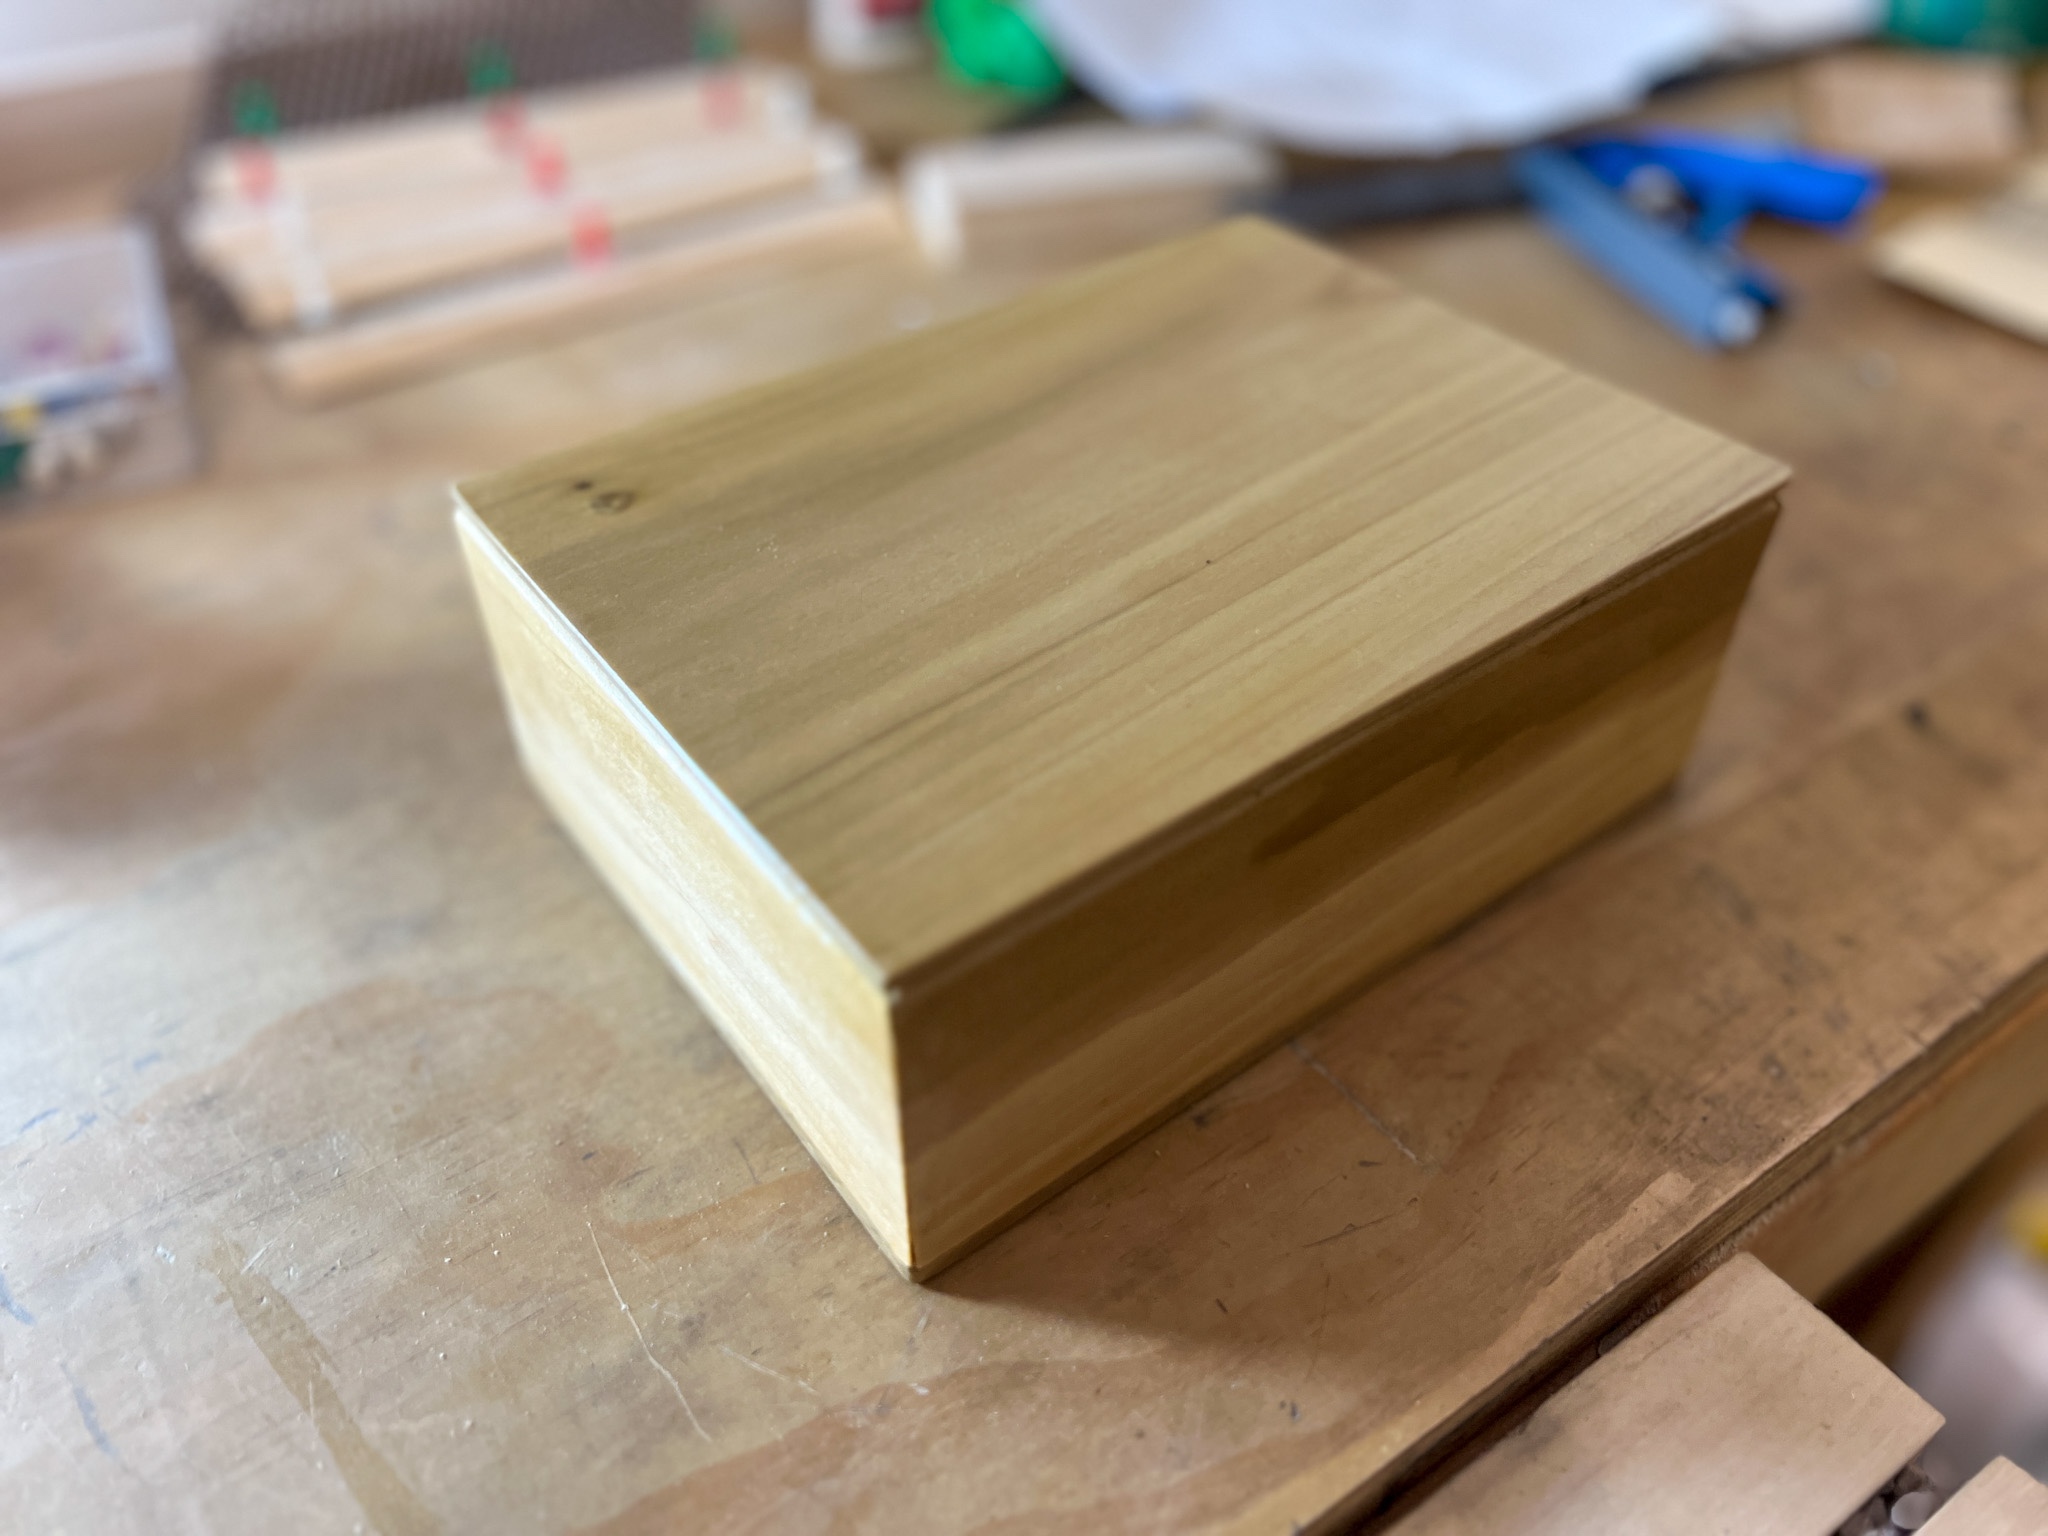 A box made out of poplar